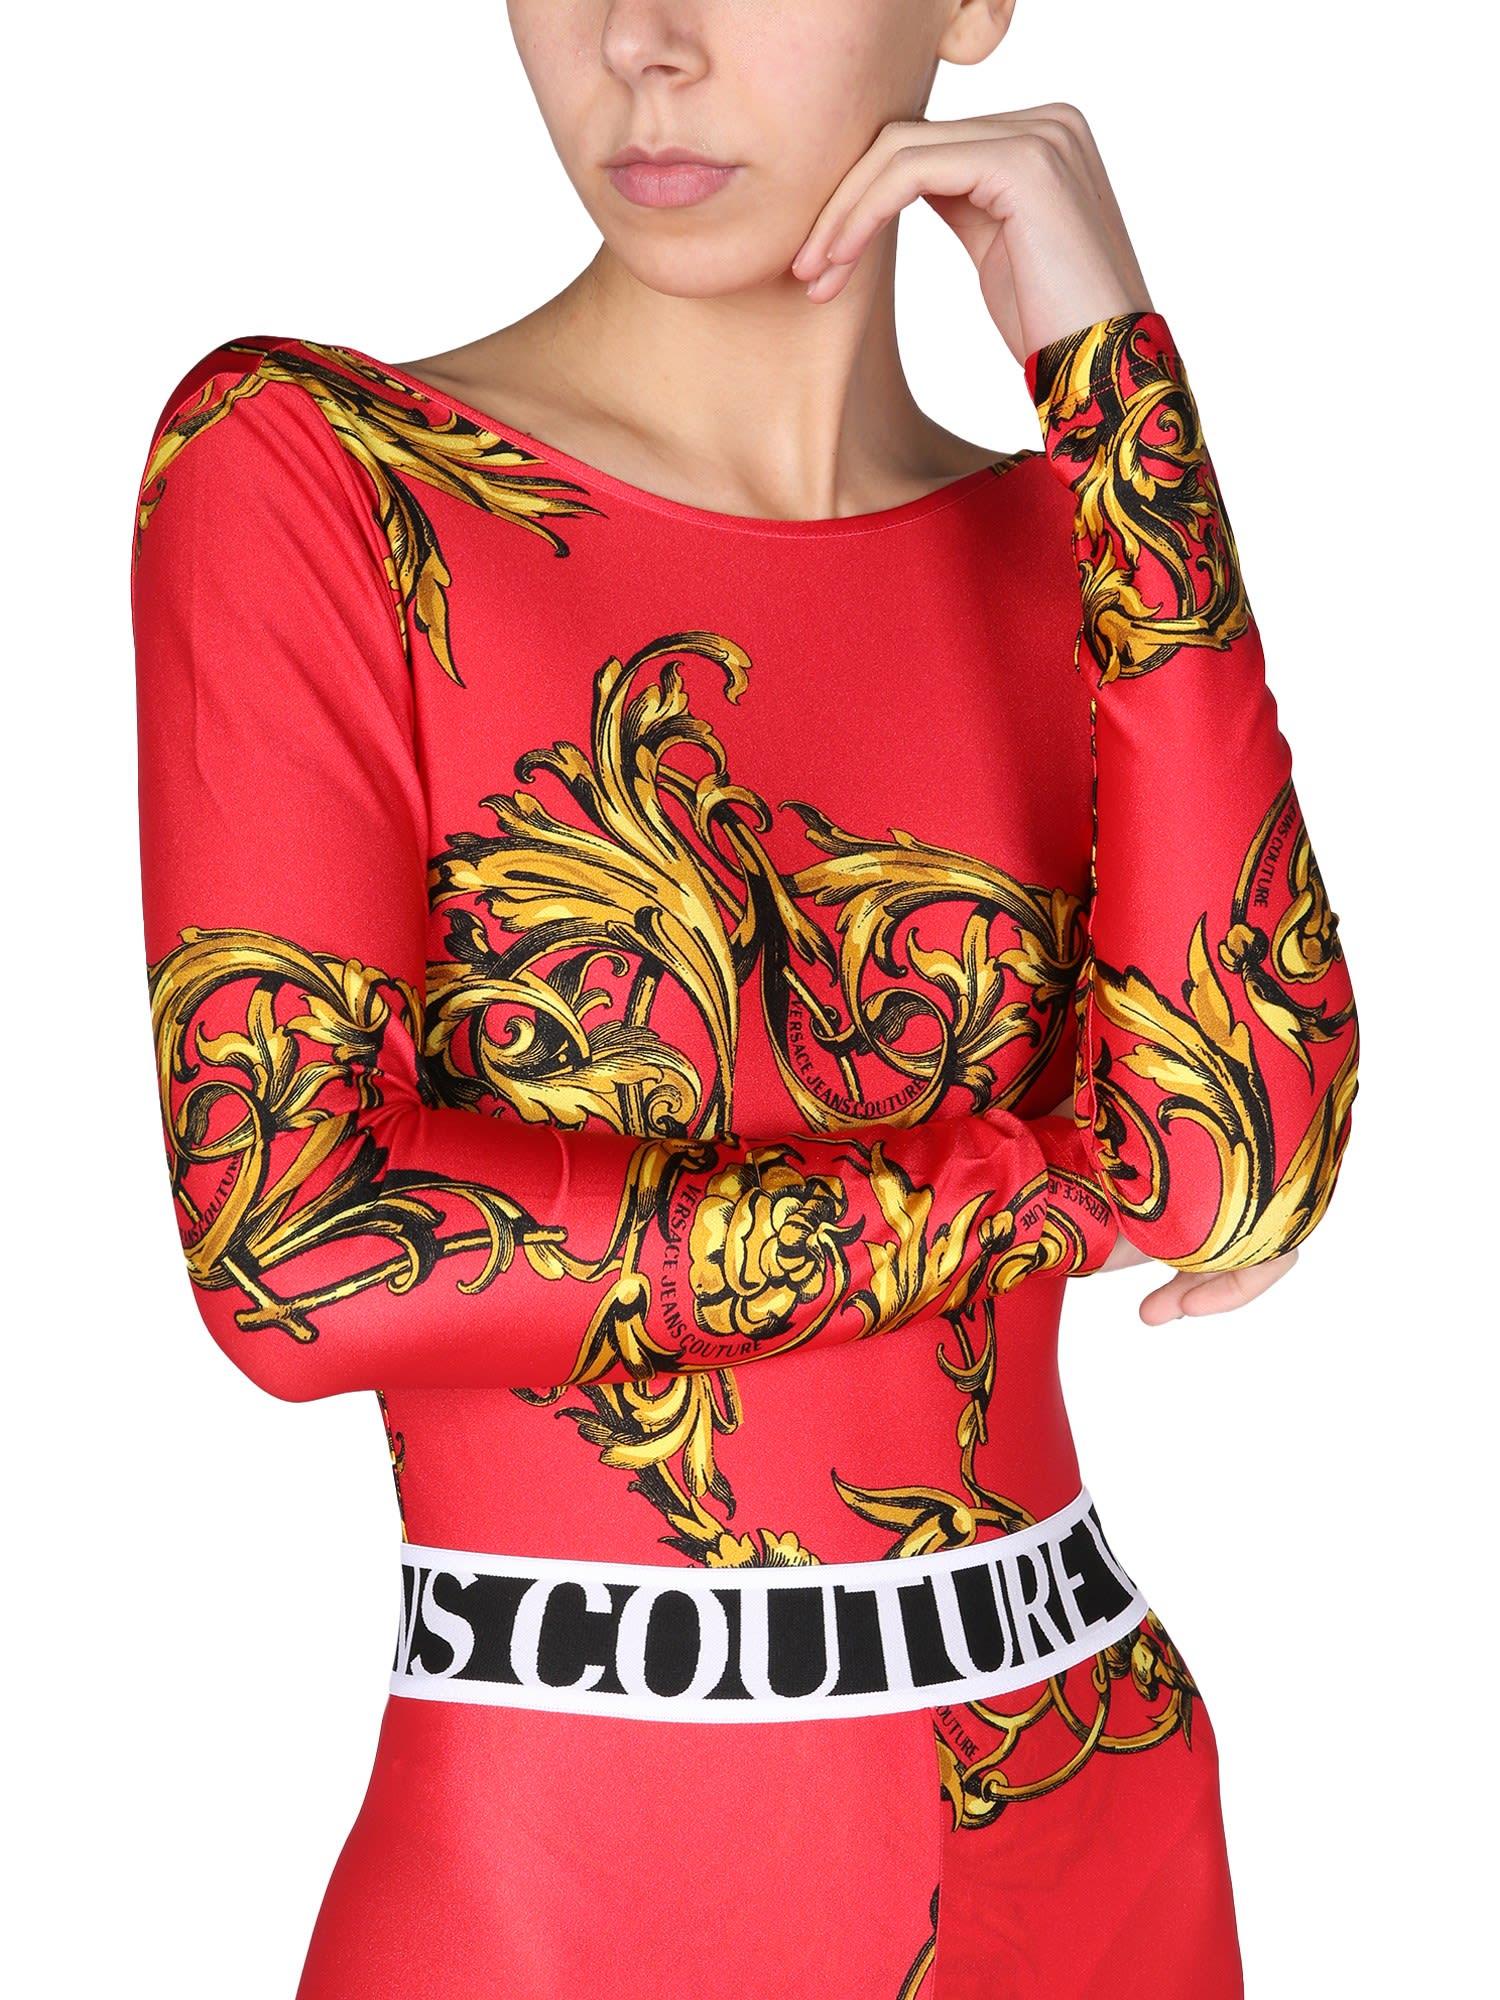 VERSACE JEANS COUTUREVERSACE JEANS COUTURE Body con stampa Regalia Baroque rosso 42 Marca 